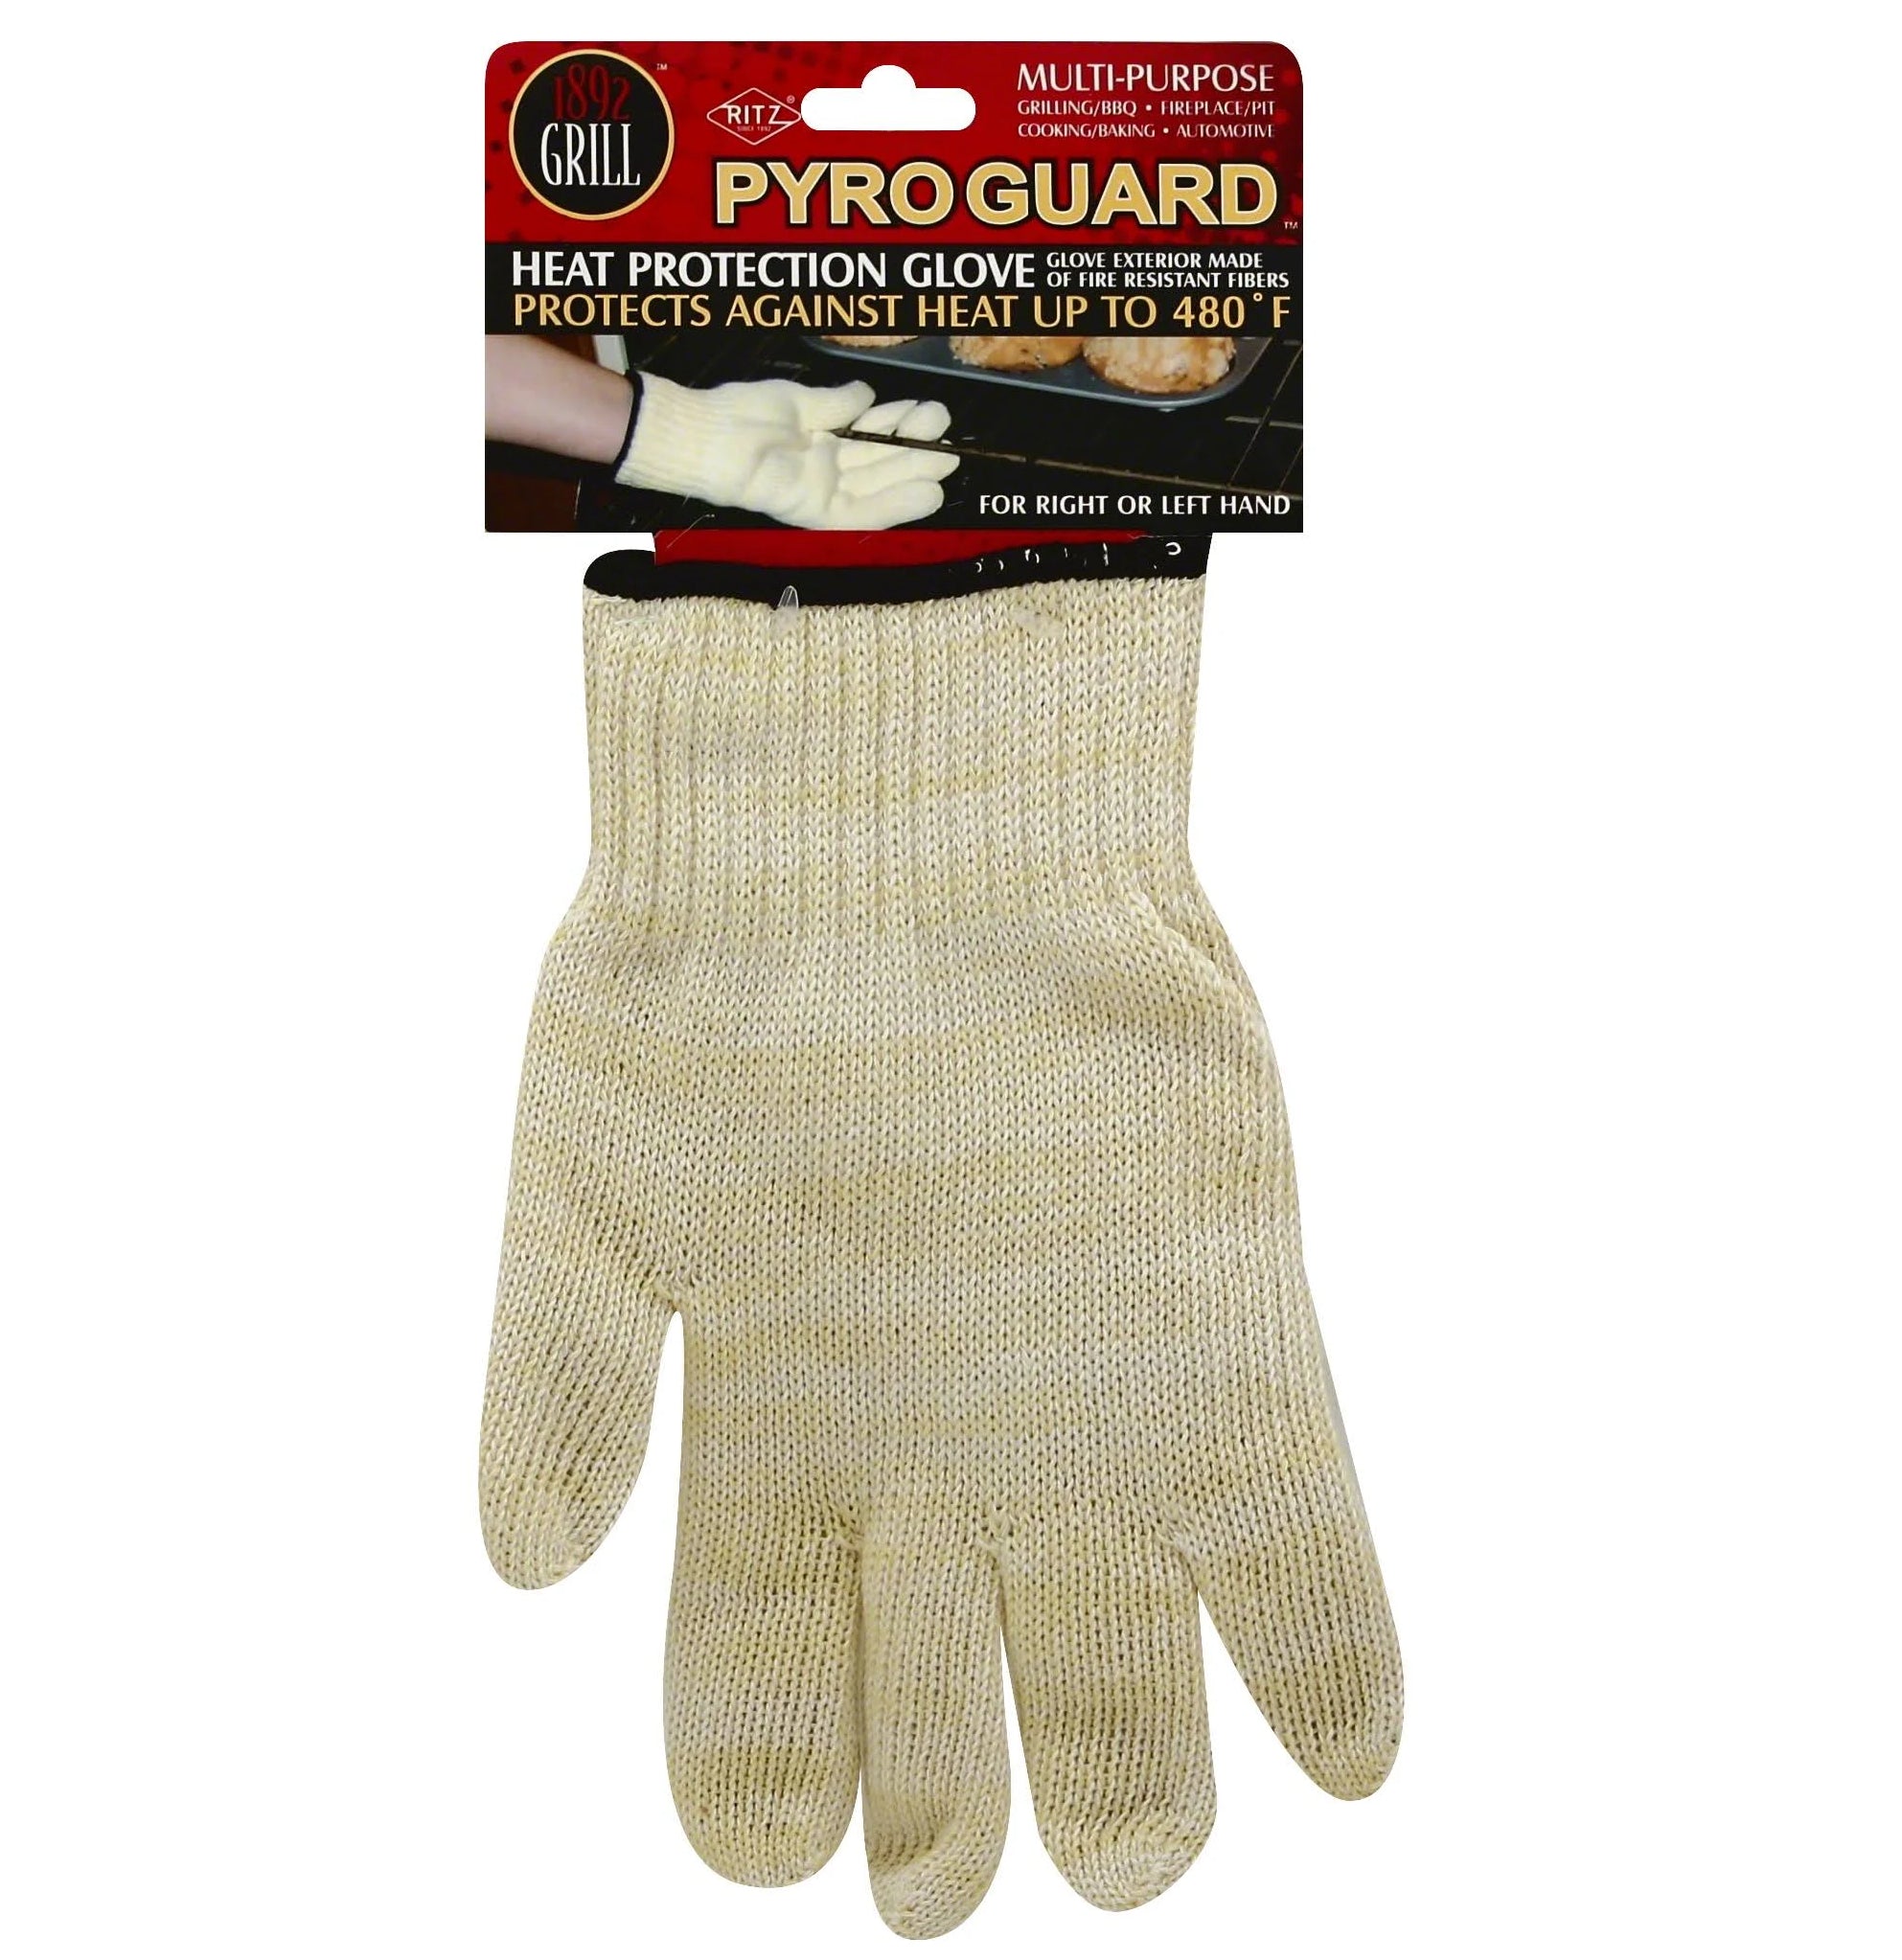 Ritz Pyroguard Glove for Kitchen And Barbecue